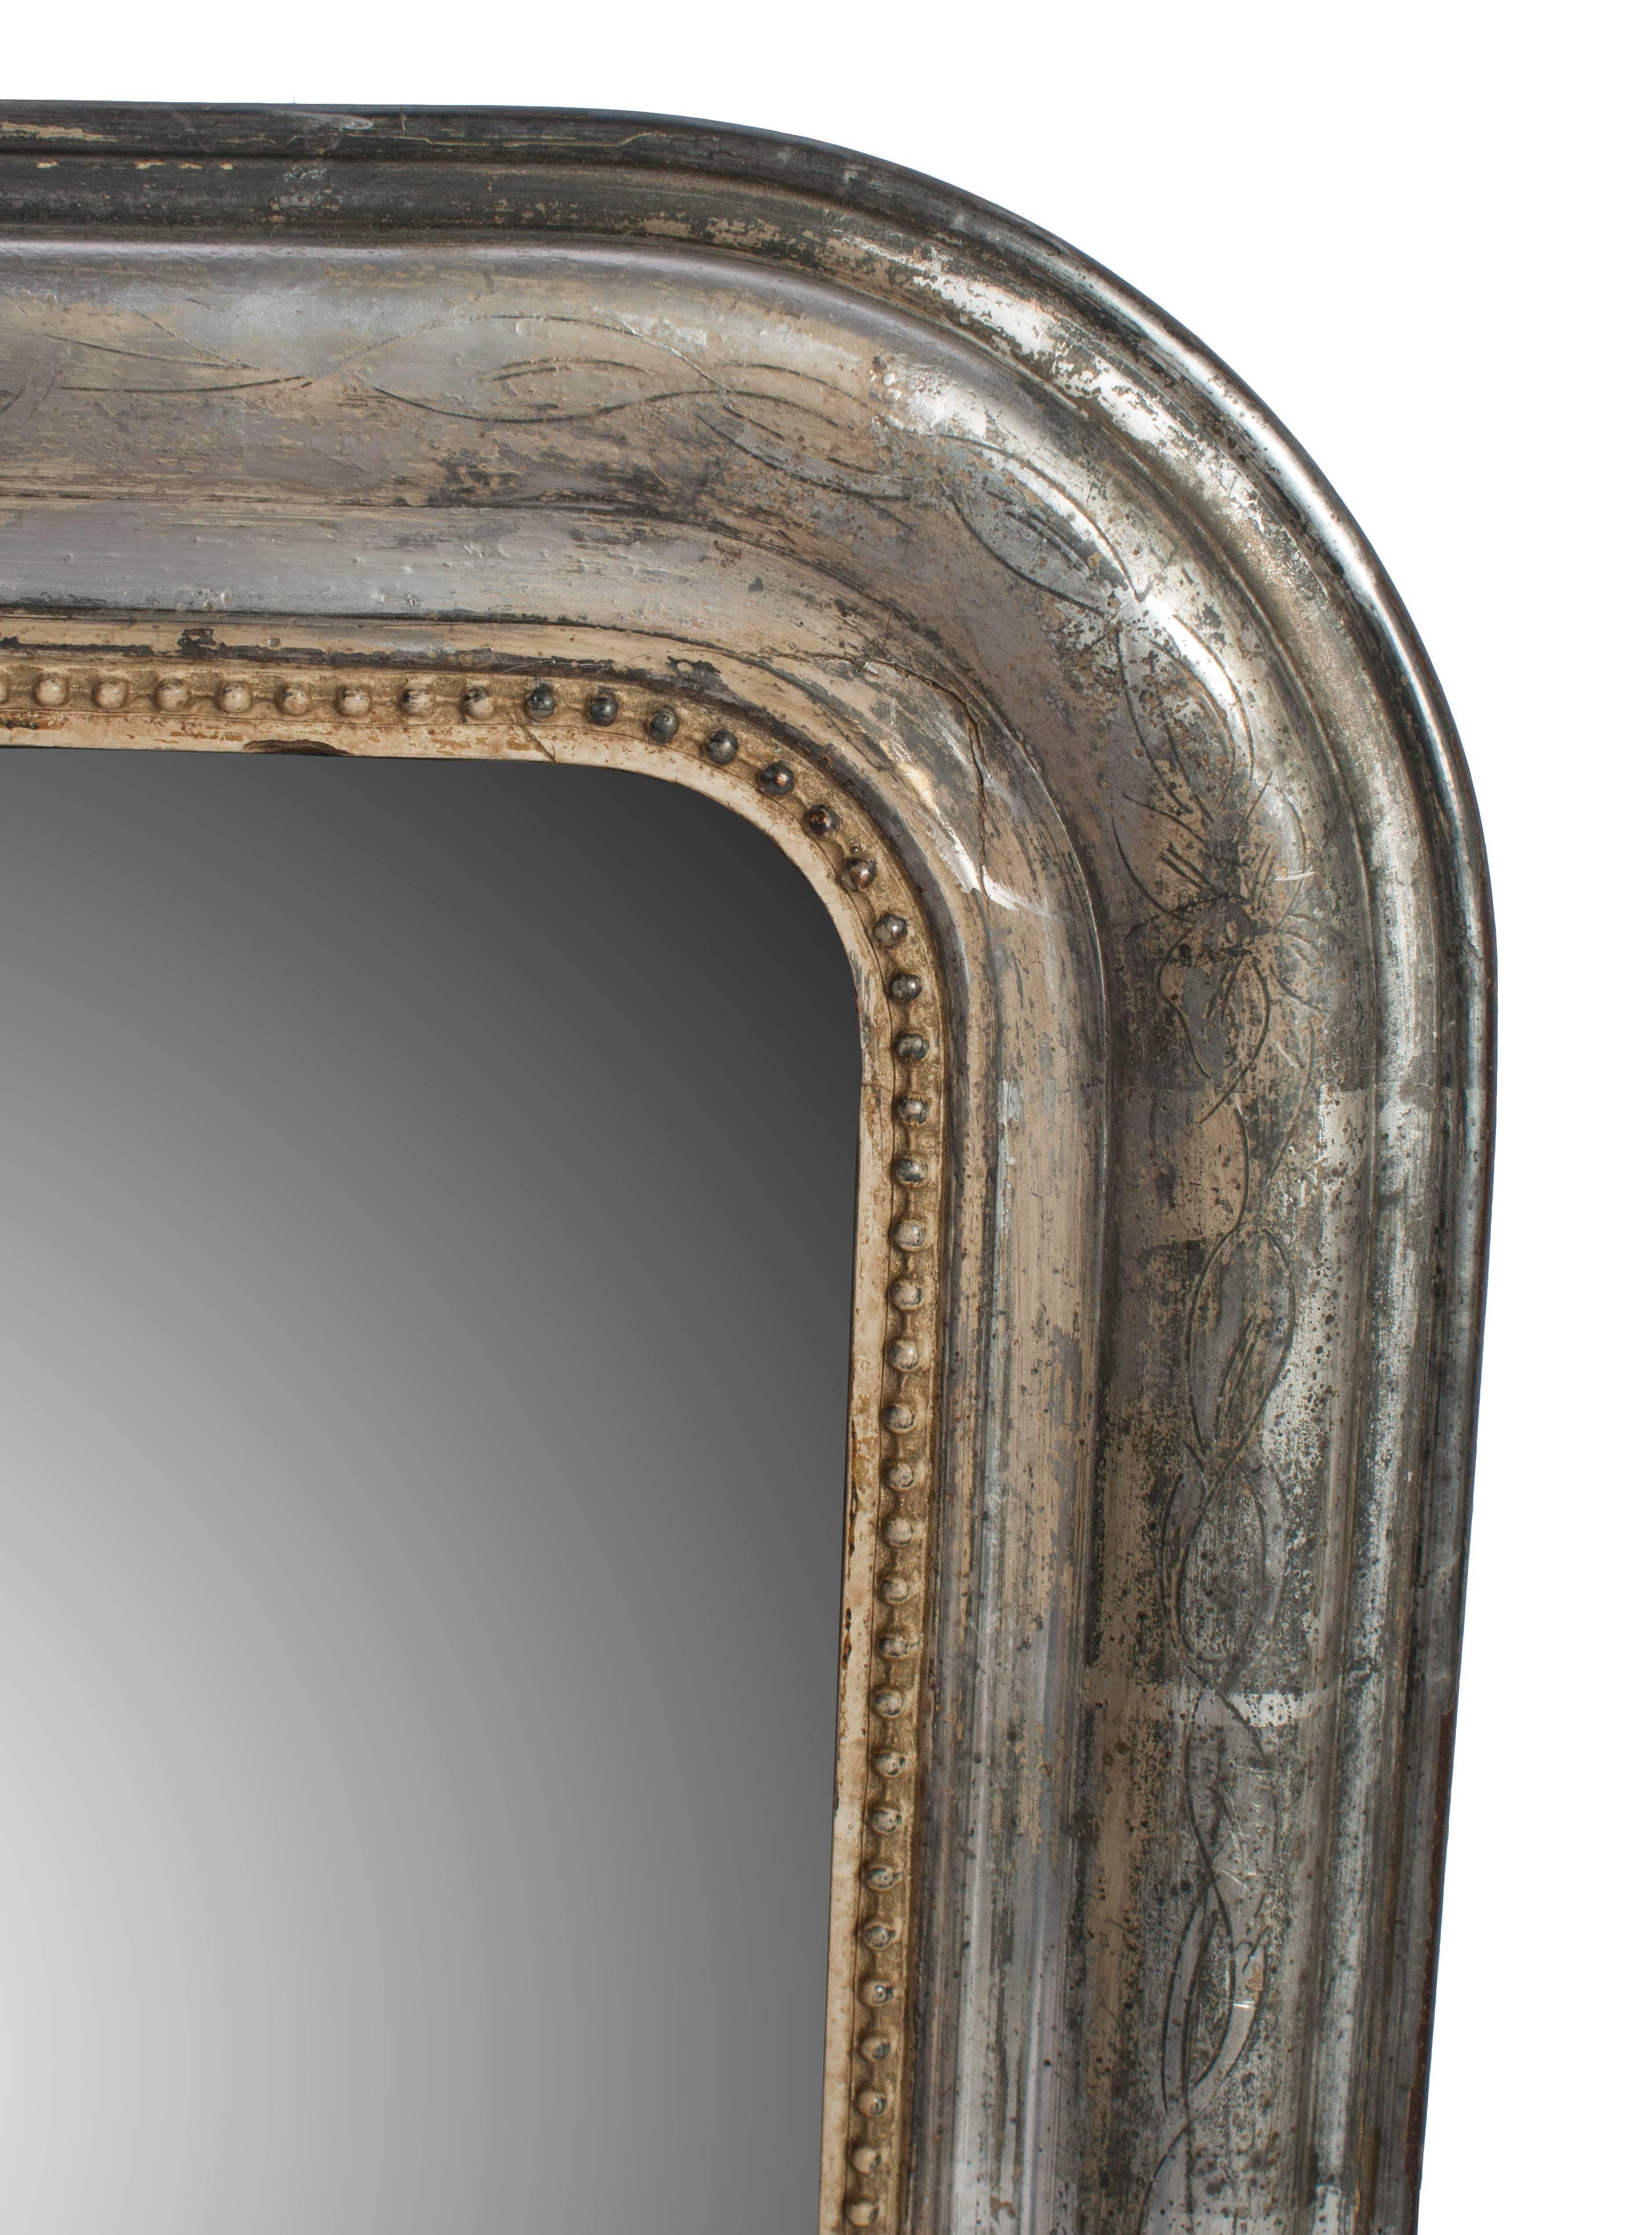 A small silver frame mirror with gold bead trim.